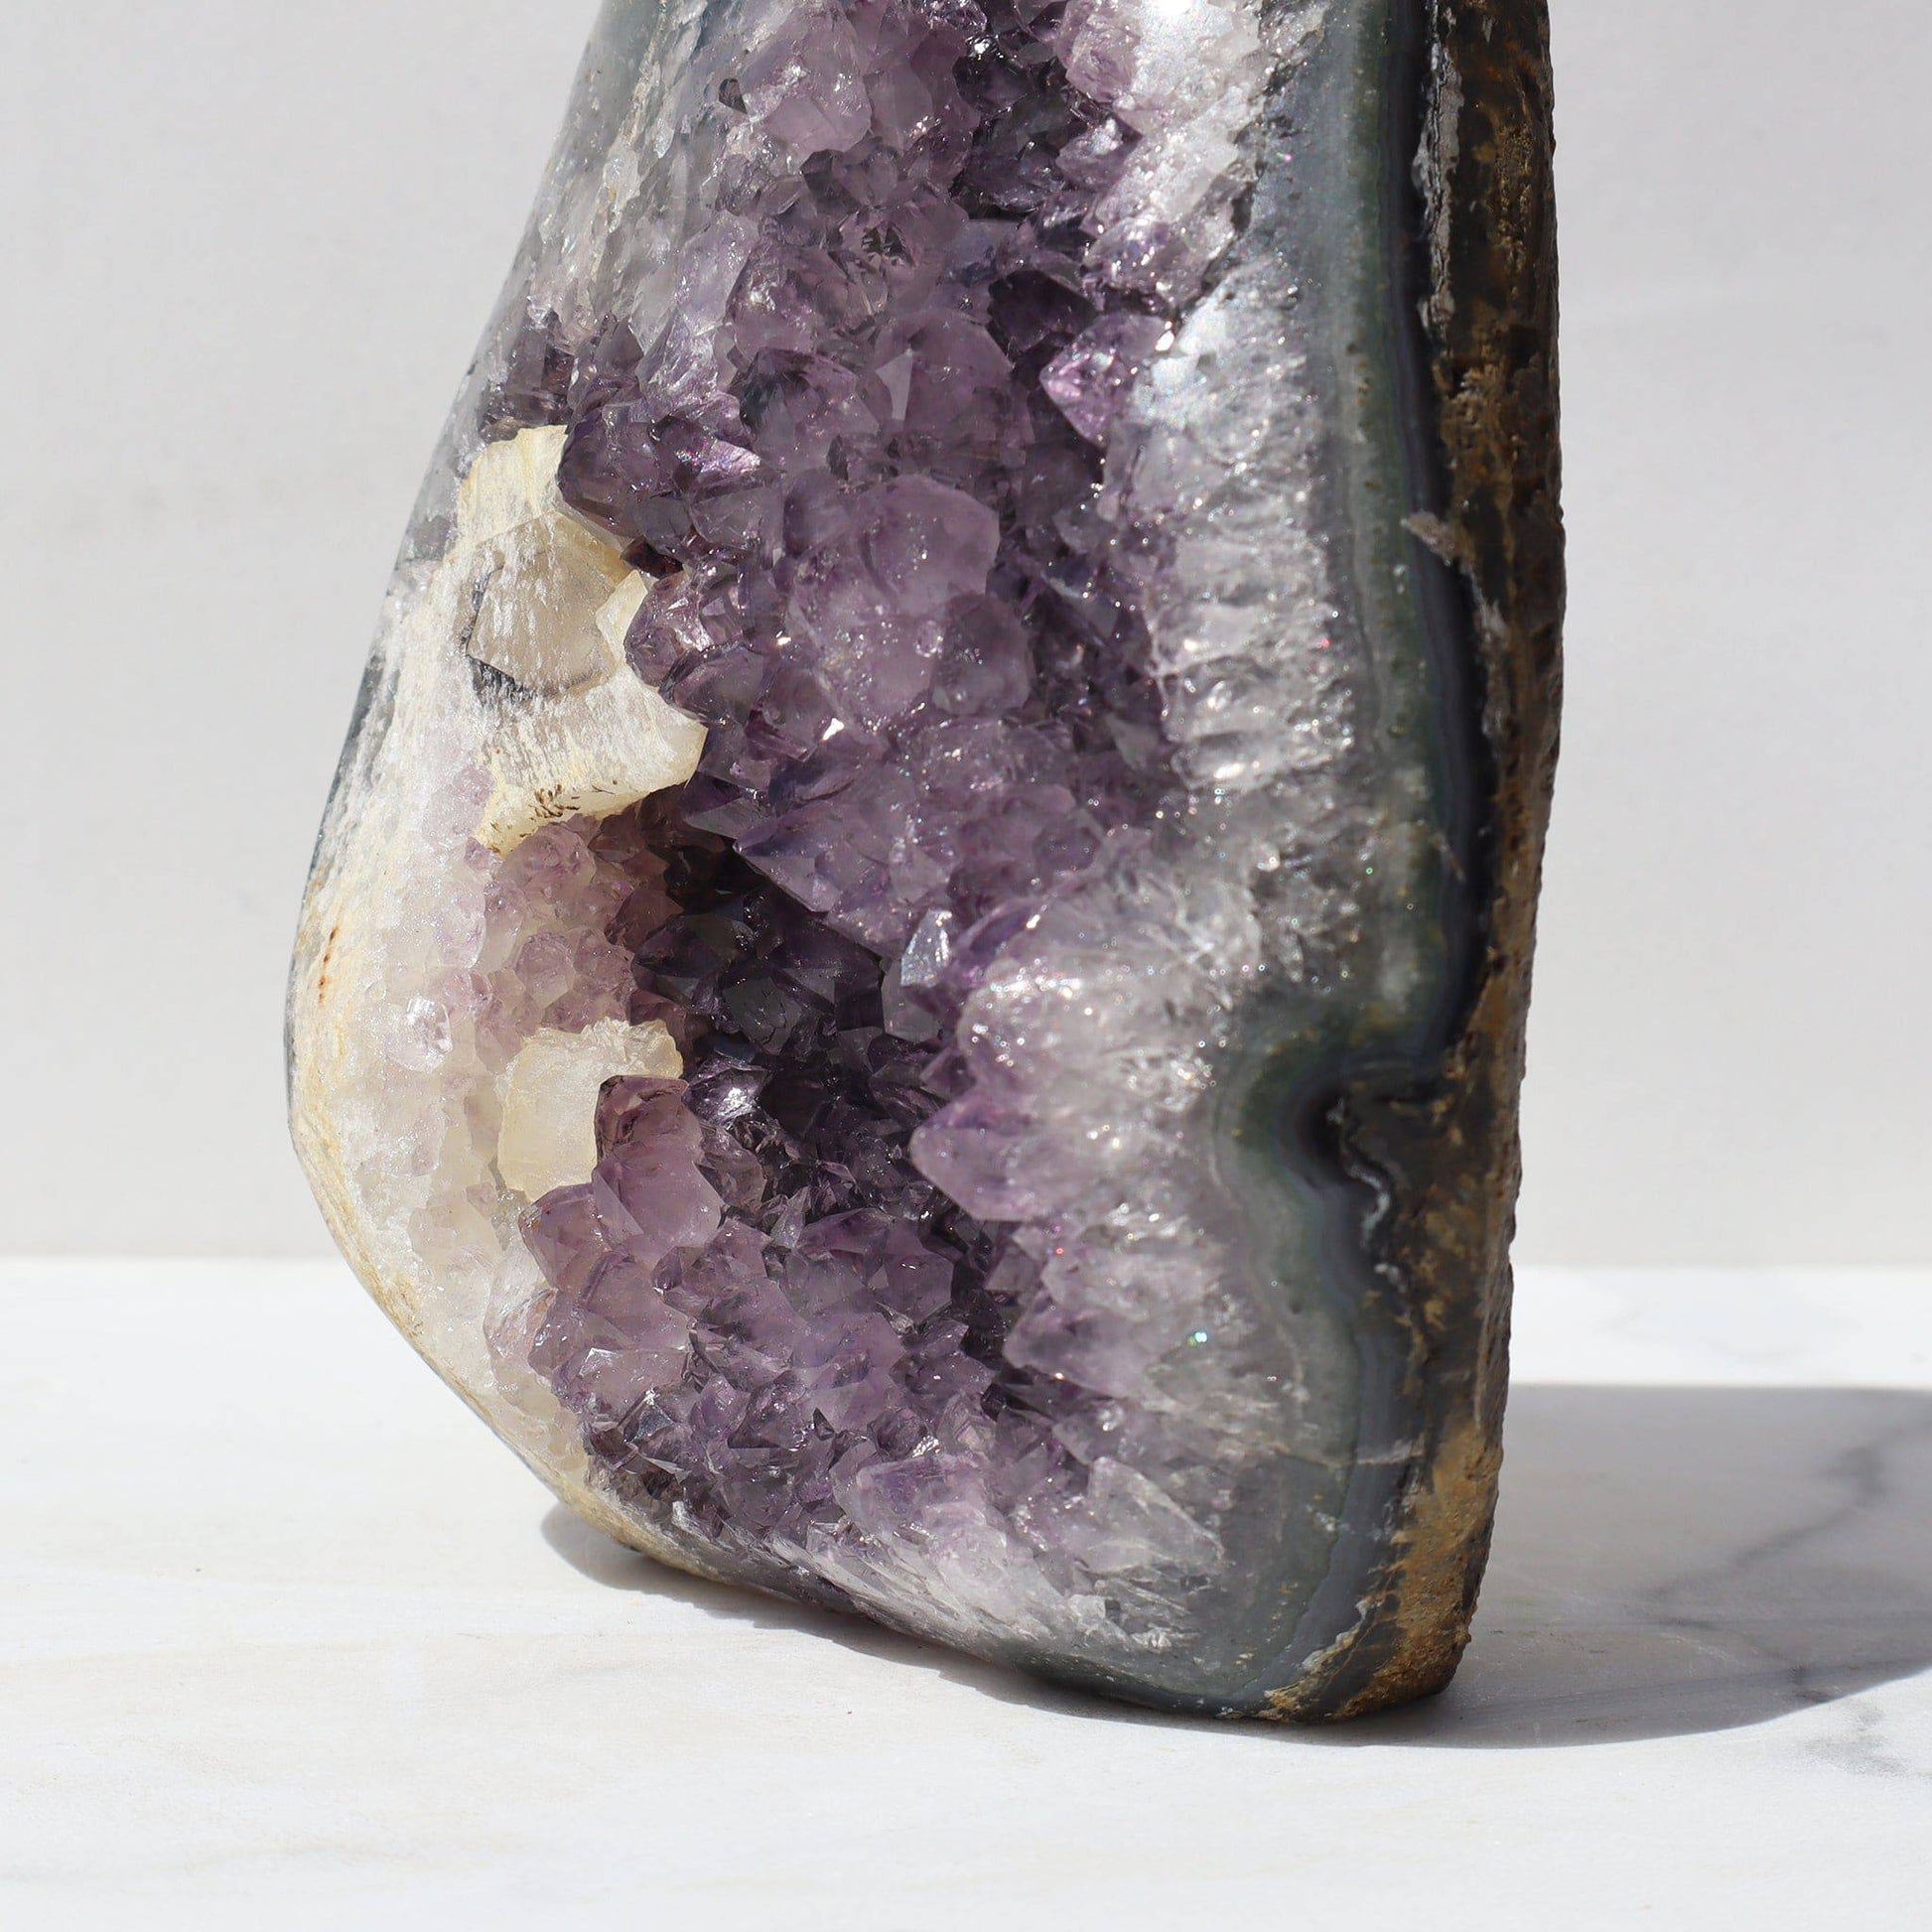 Violet Crystals and Green Jasper - Deepest Earth